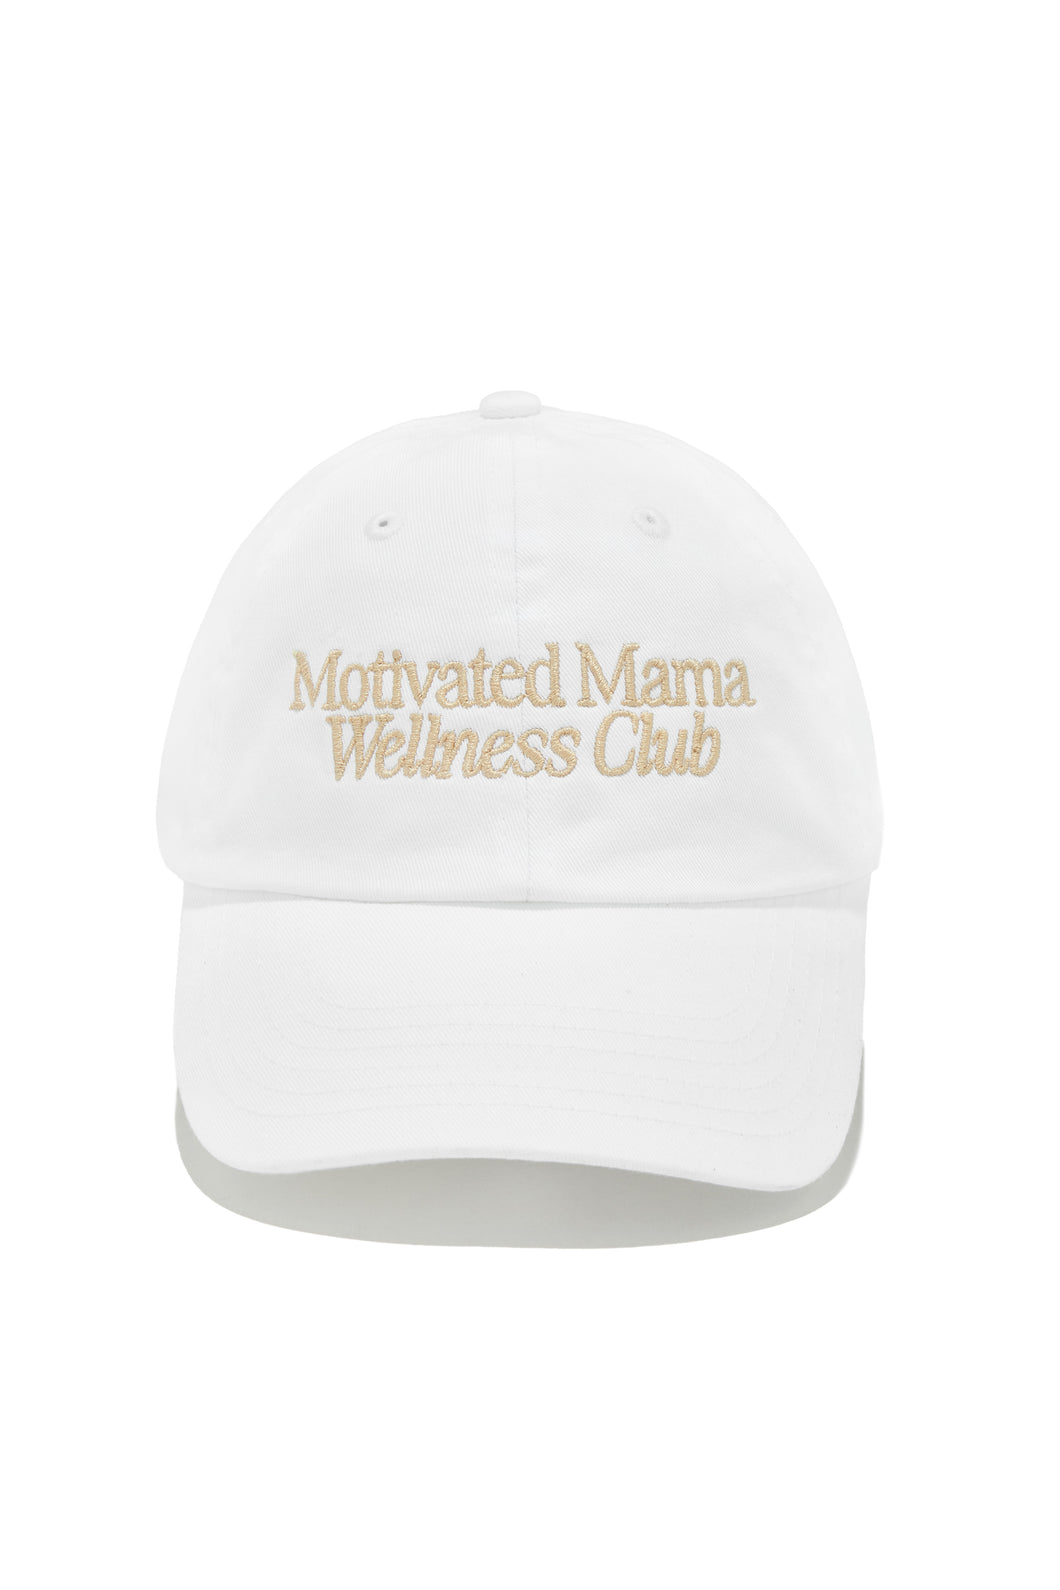 Motivated Mama Wellness Club Hat Exclusive Hat - Nude